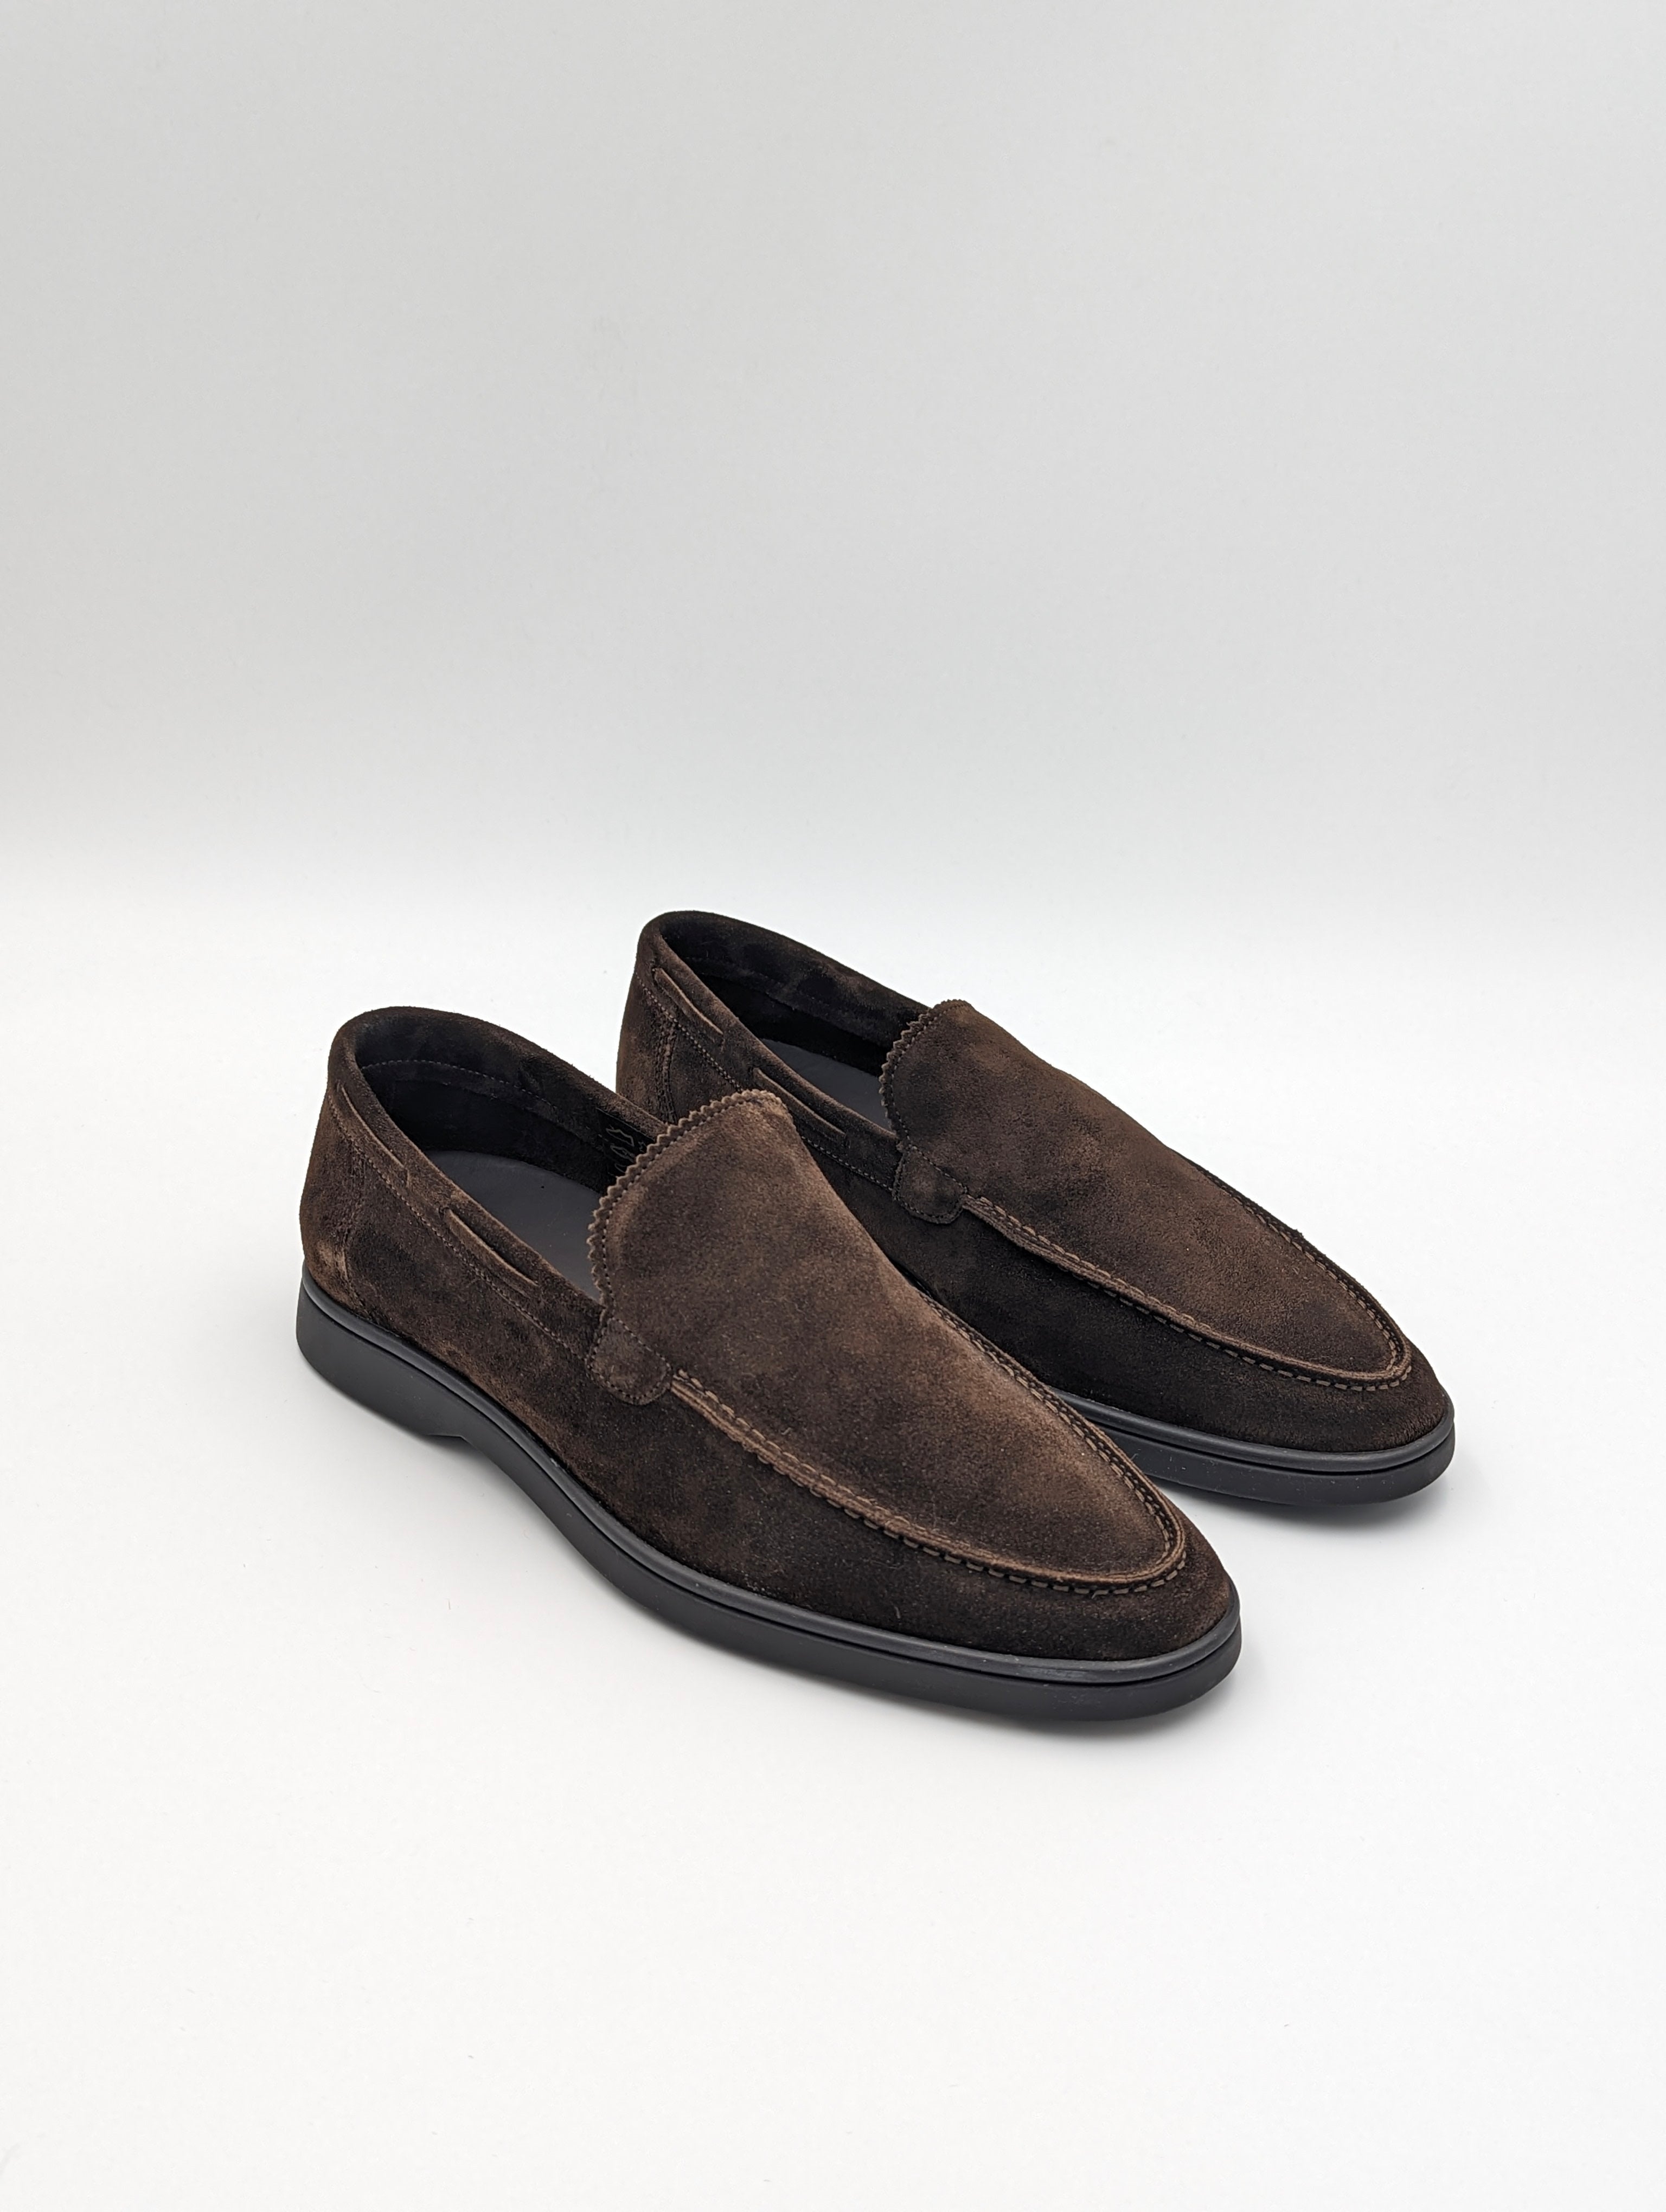 LOAFERS - CHOCOLATE Suede